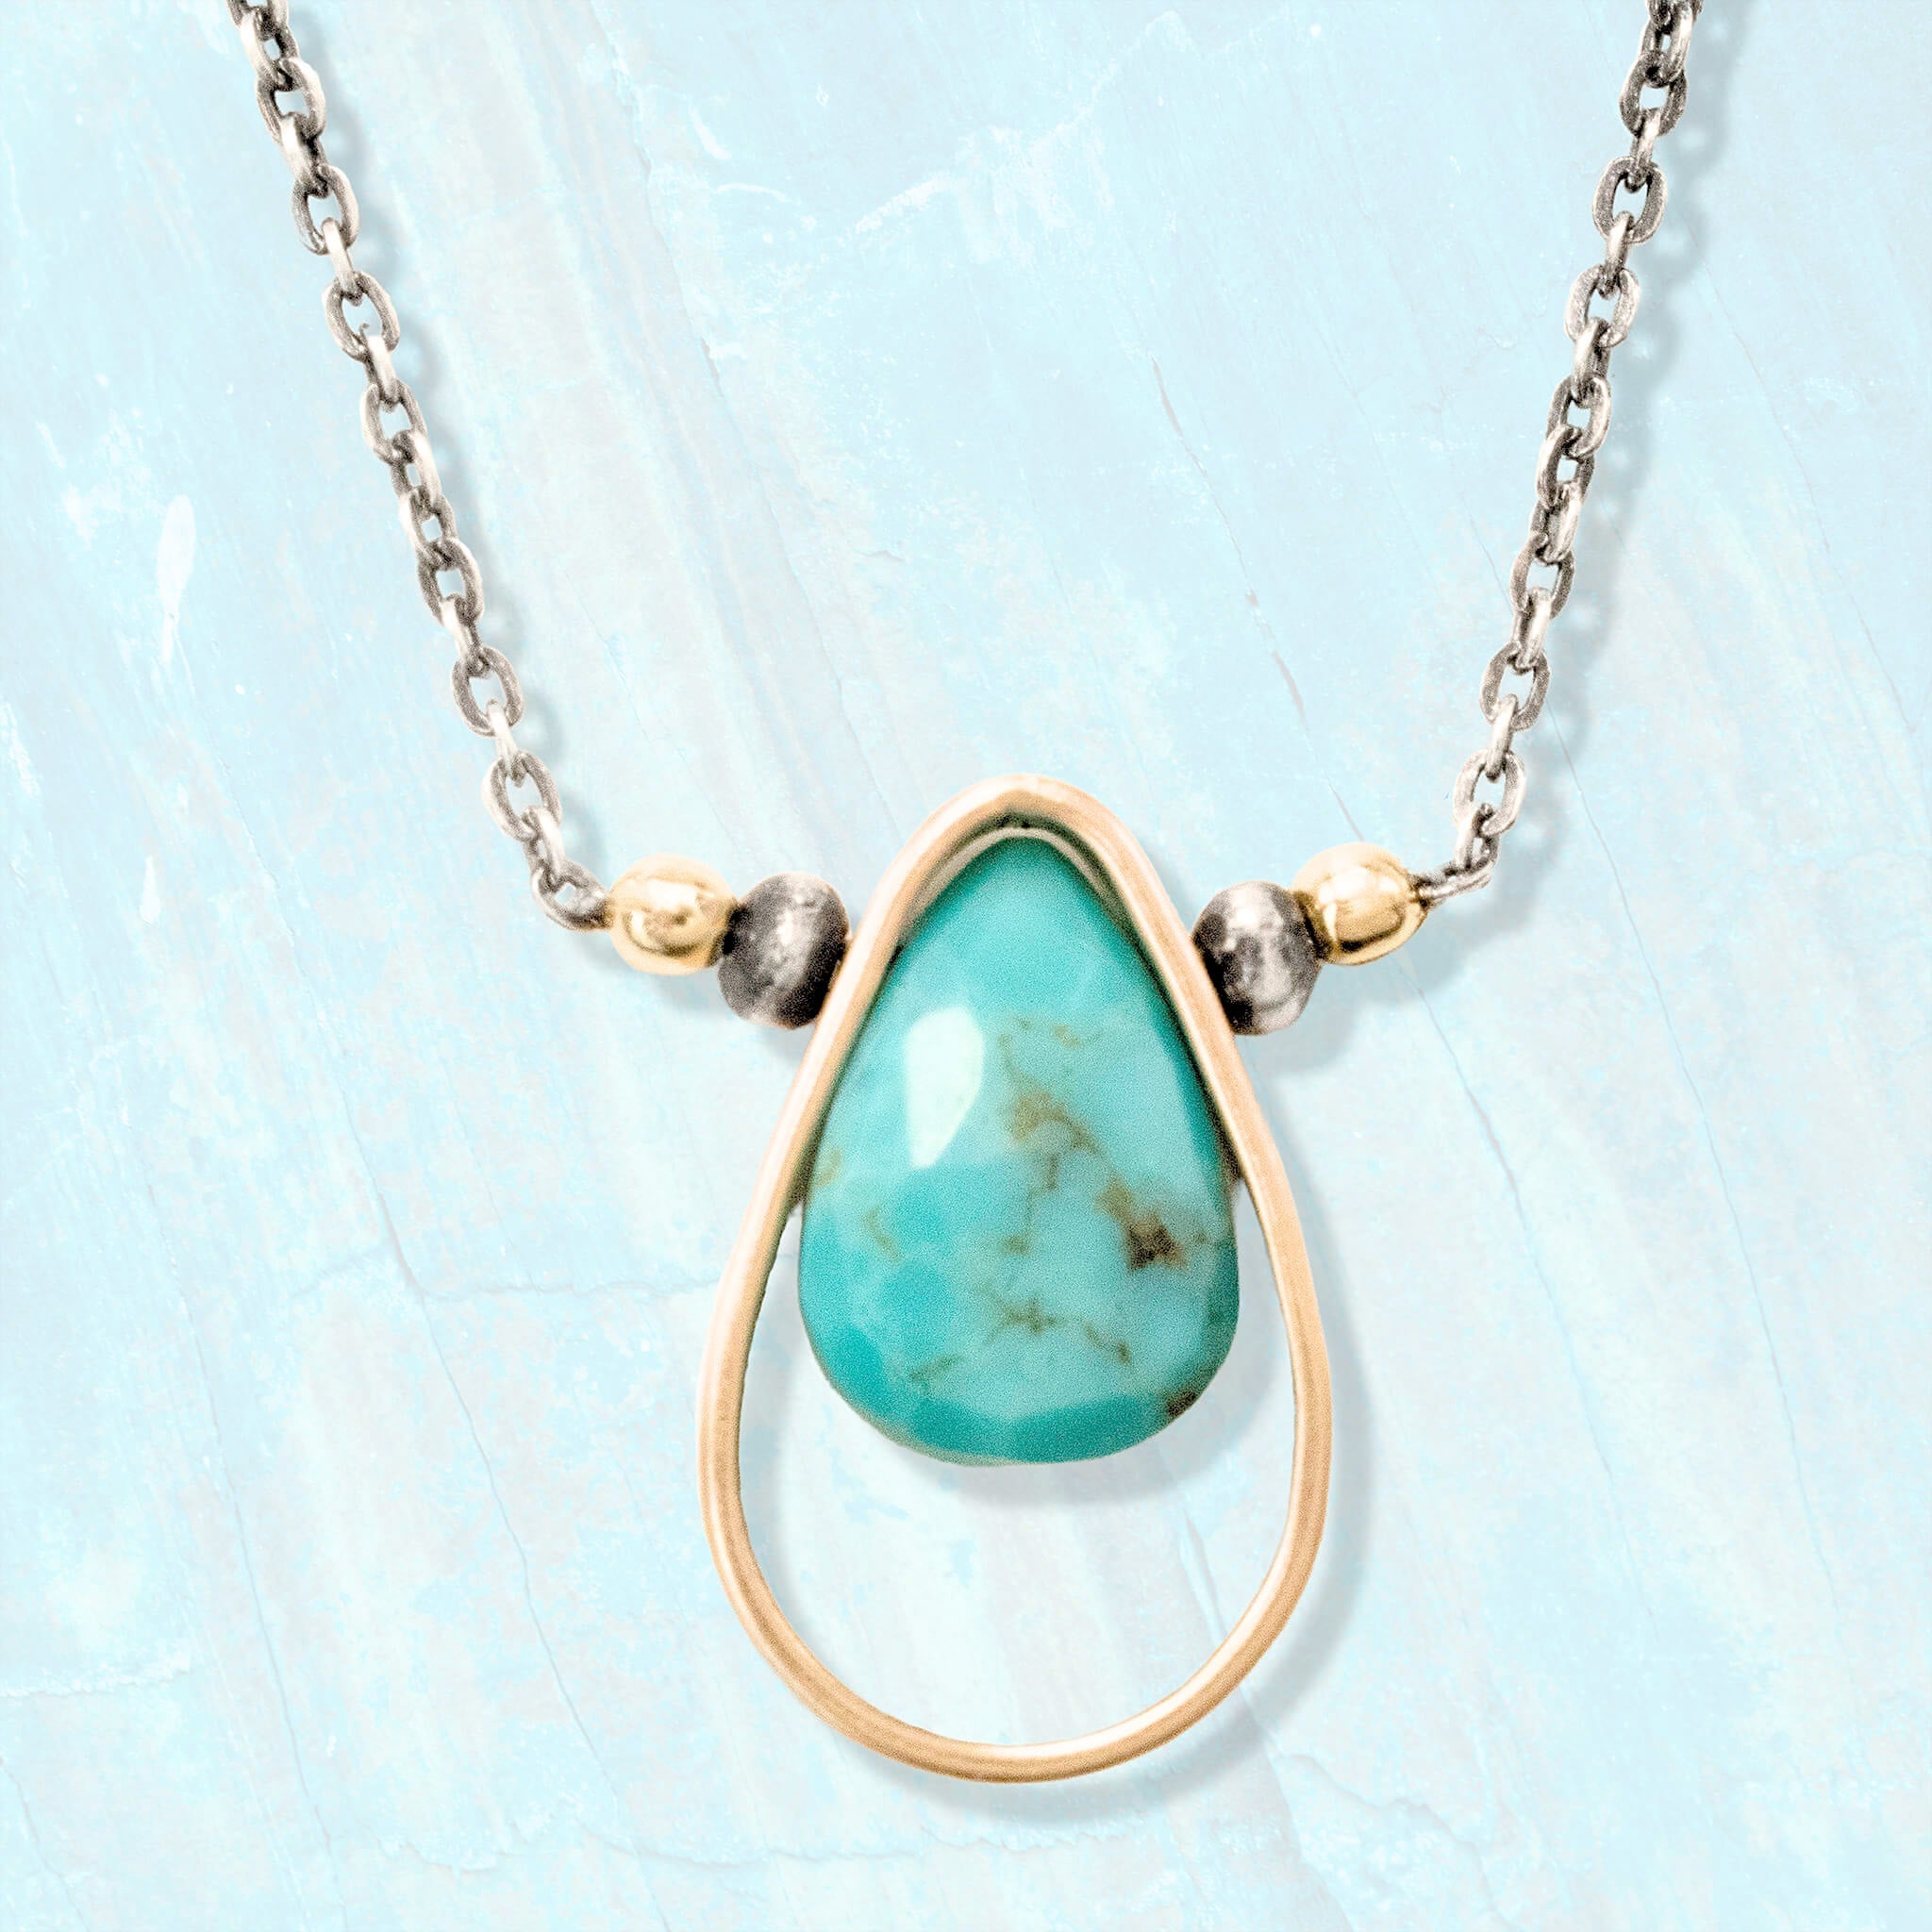 Turquoise Teardrop Necklace - Necklaces